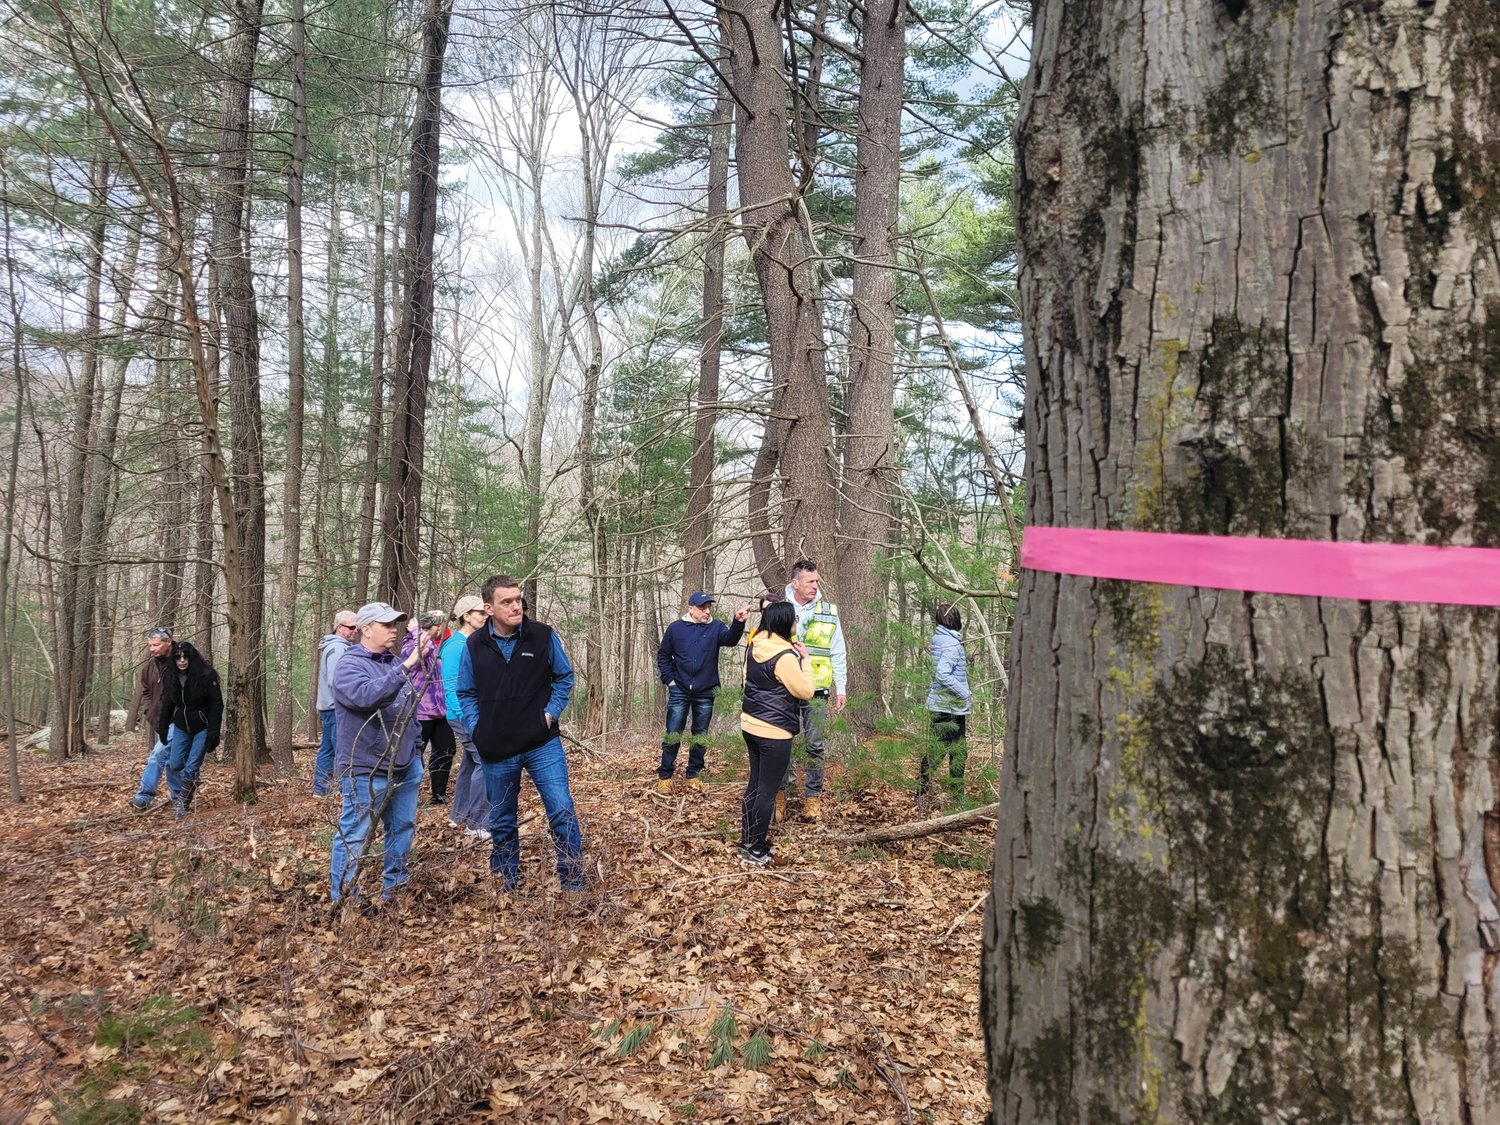 TIE A PINK RIBBON: The group eventually made its way into the woods, where they trekked to find pink ribbons marking the likely fence-line that will be built to encircle the new solar fields. The ribbons are clearly visible from Rollingwood Drive backyards.